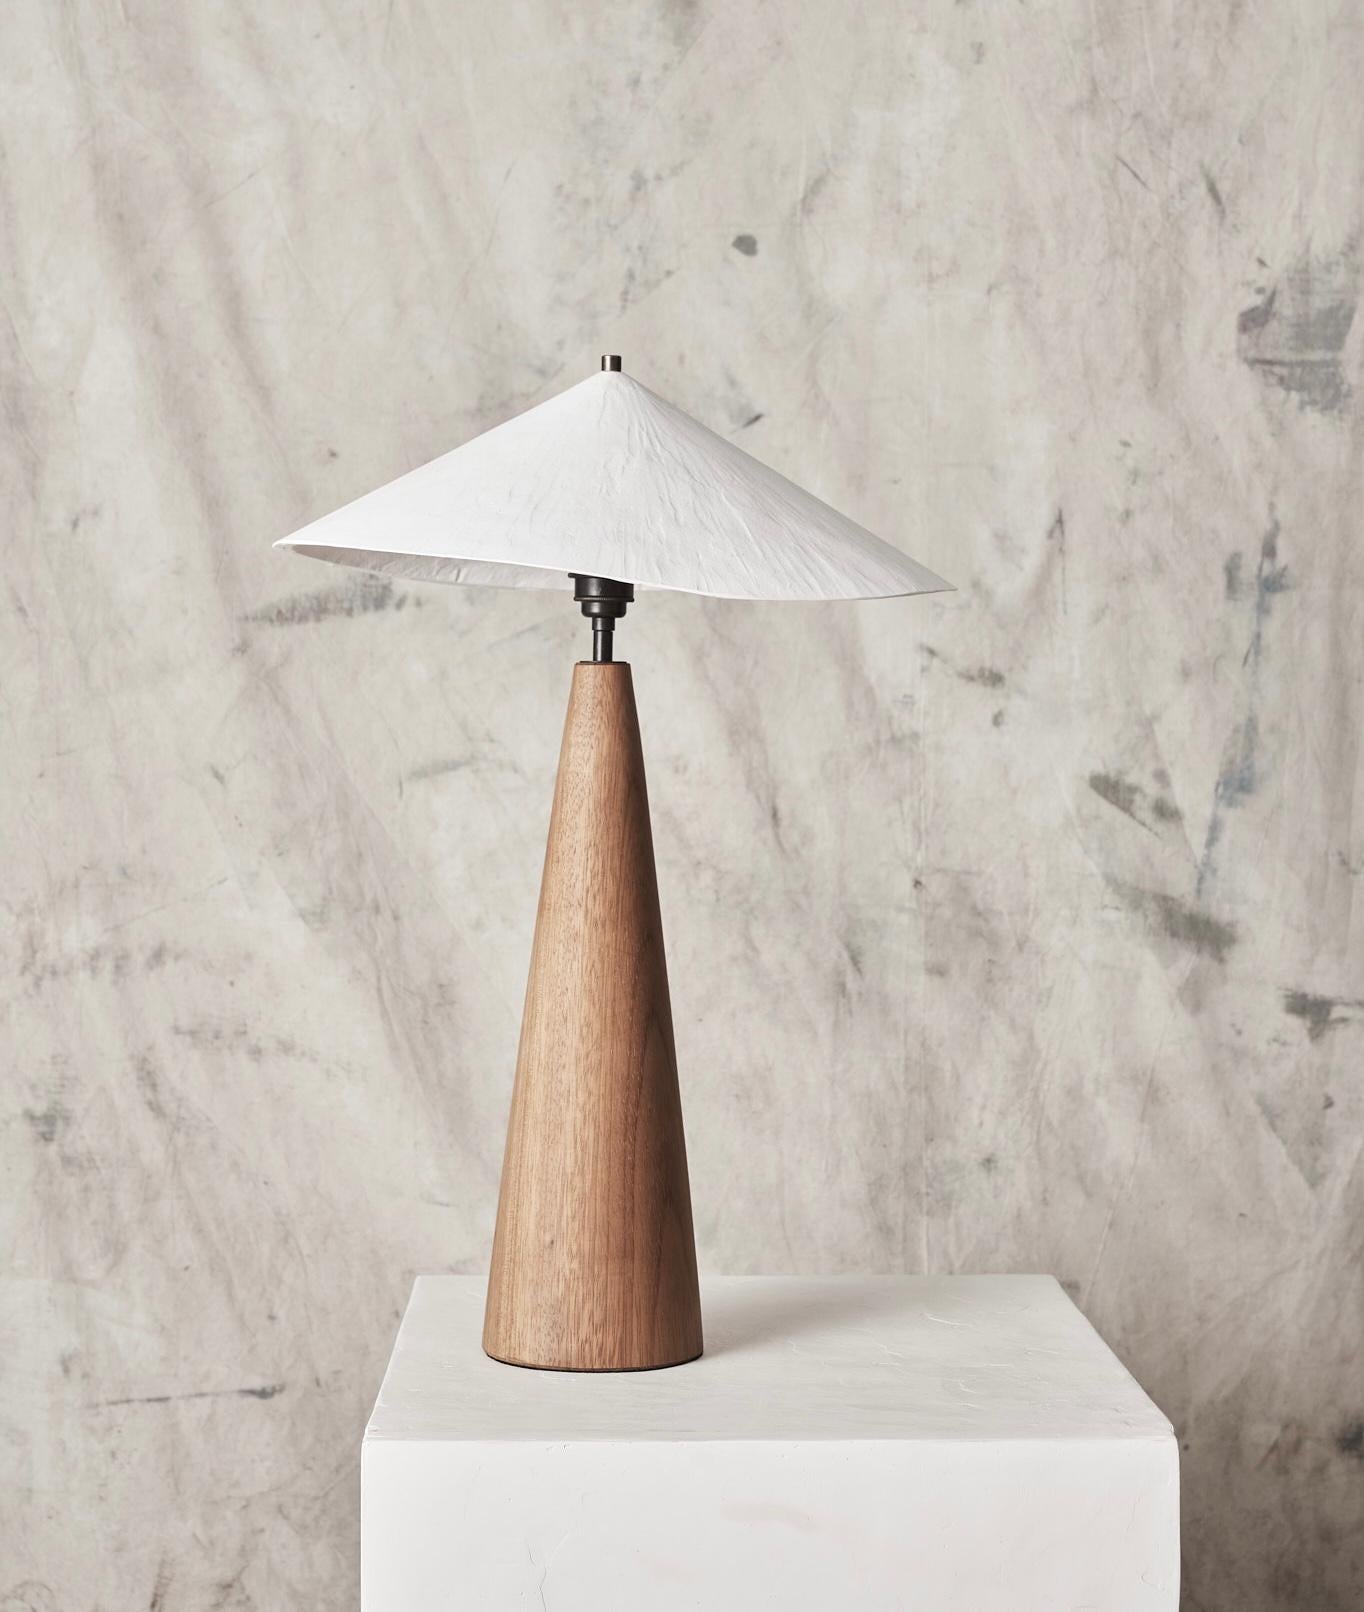 The Wobble Table Lamp casts a warm downwards light, creating an atmospheric glow to any room. 
Incorporating our original scaled down plaster wobble shade, paired with a beautiful hand turned iroko wooden base, the Wobble Table Lamp offers a